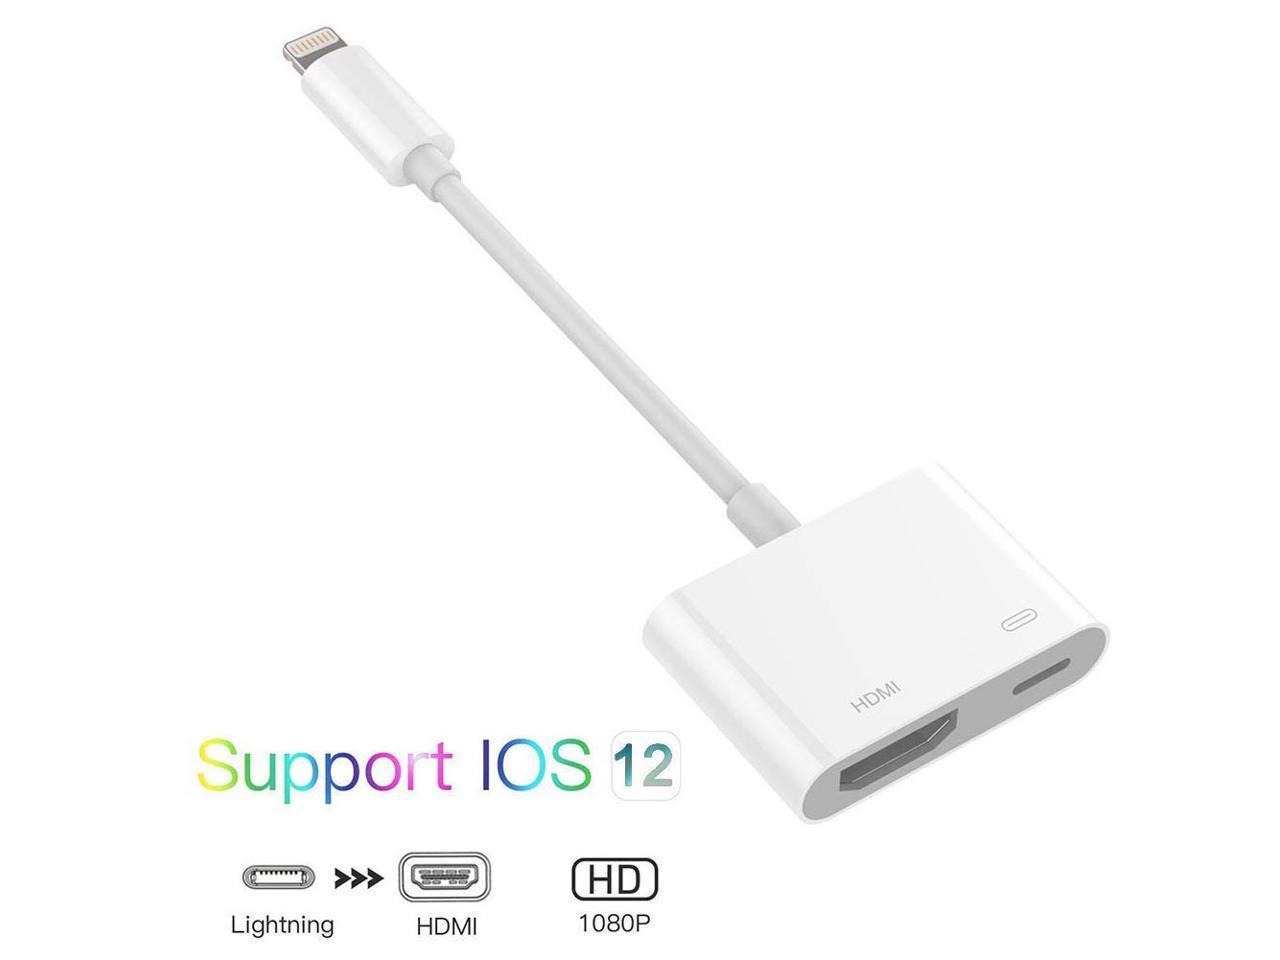 Lightning to 1080P Digital AV Adapter,with iPhone Charging Port for HD TV/Monitor/Projector Compatible with iPhone 11/XS/XR/X/8/7 Support iOS 13-White Apple MFi Certified HDMI Adapter for iPhone 